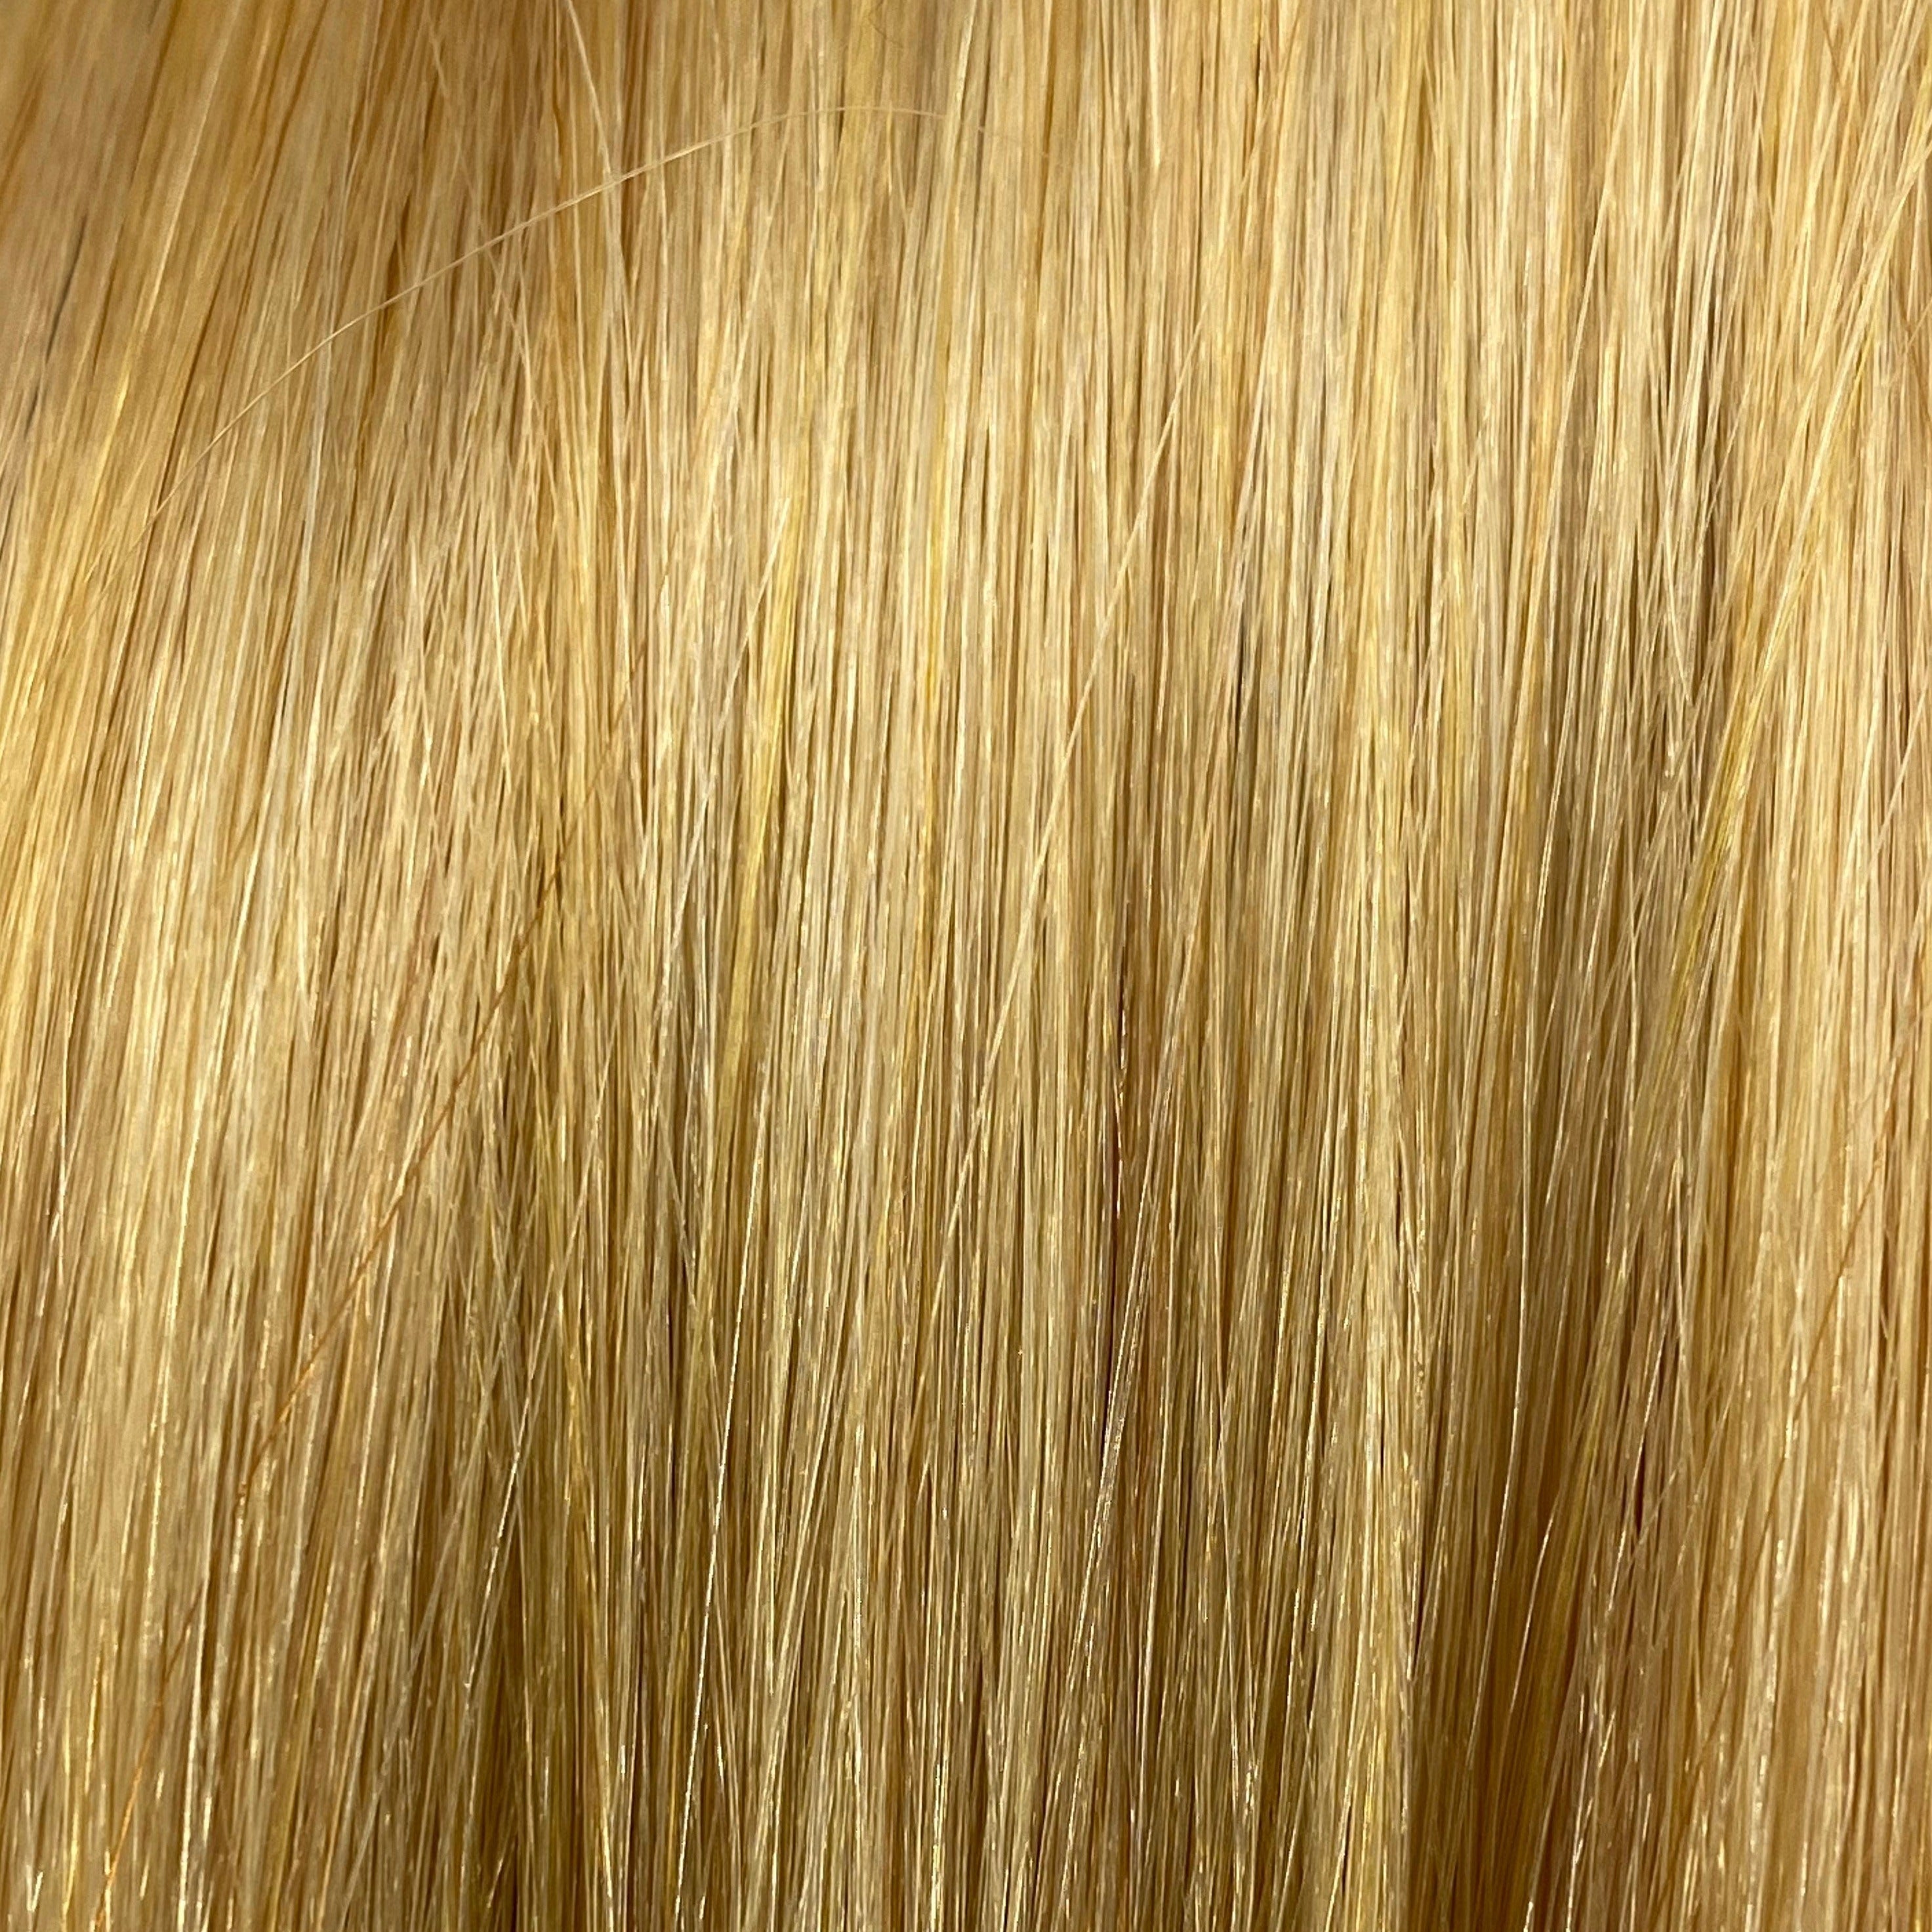 FUSION #20 VERY LIGHT ULTRA BLONDE 40CM/ 16 INCHES  -  17.5 GRAMS